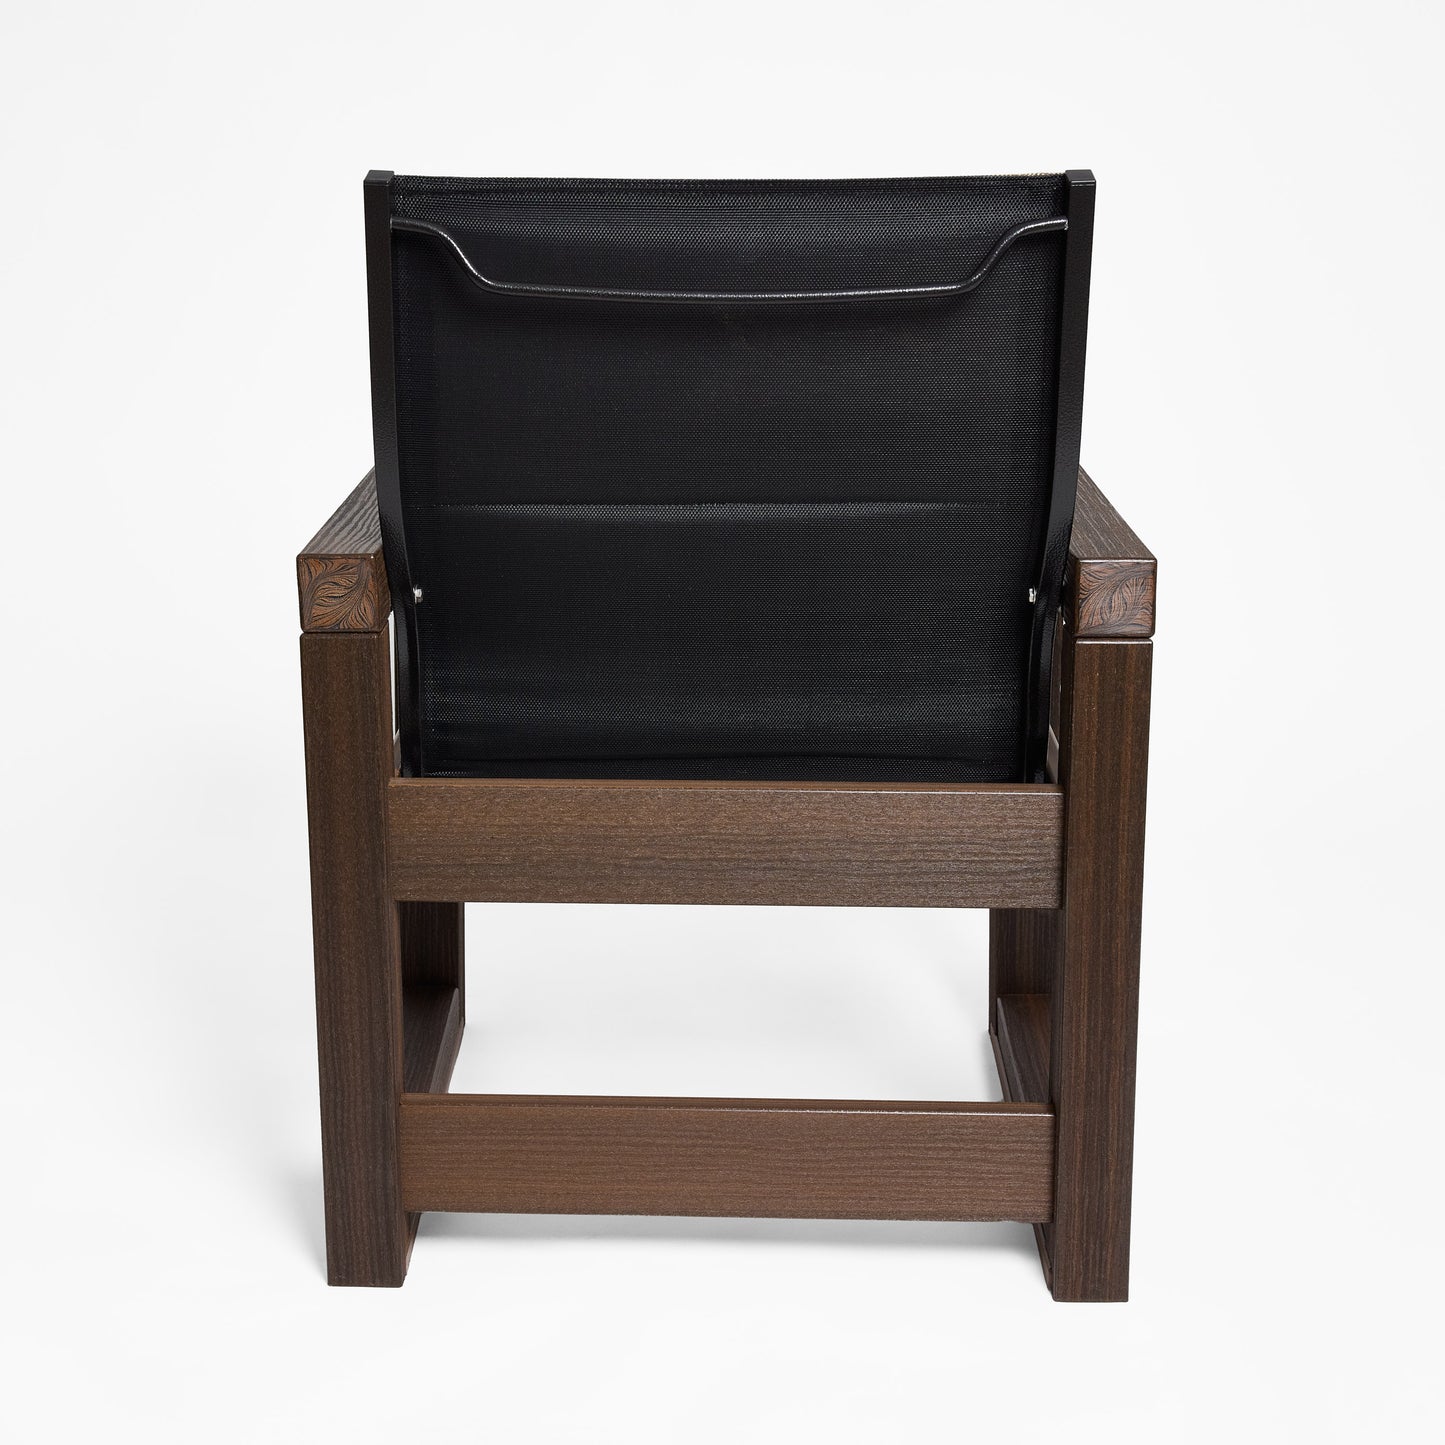 Frame Padded Sling Dining Chair